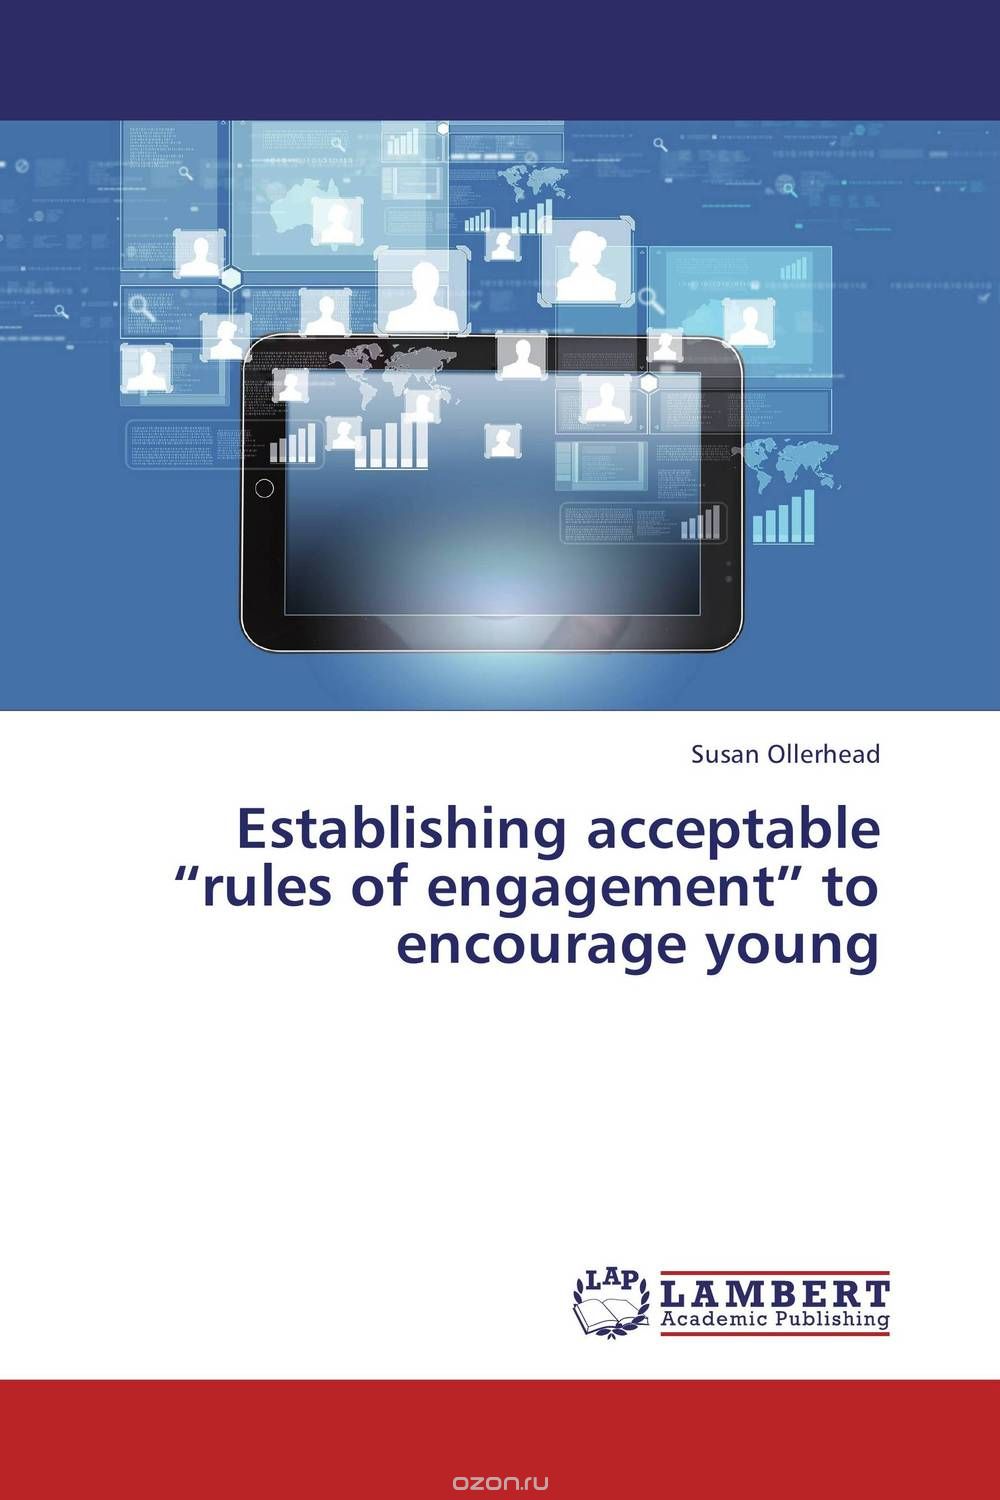 Скачать книгу "Establishing acceptable “rules of engagement” to encourage young"